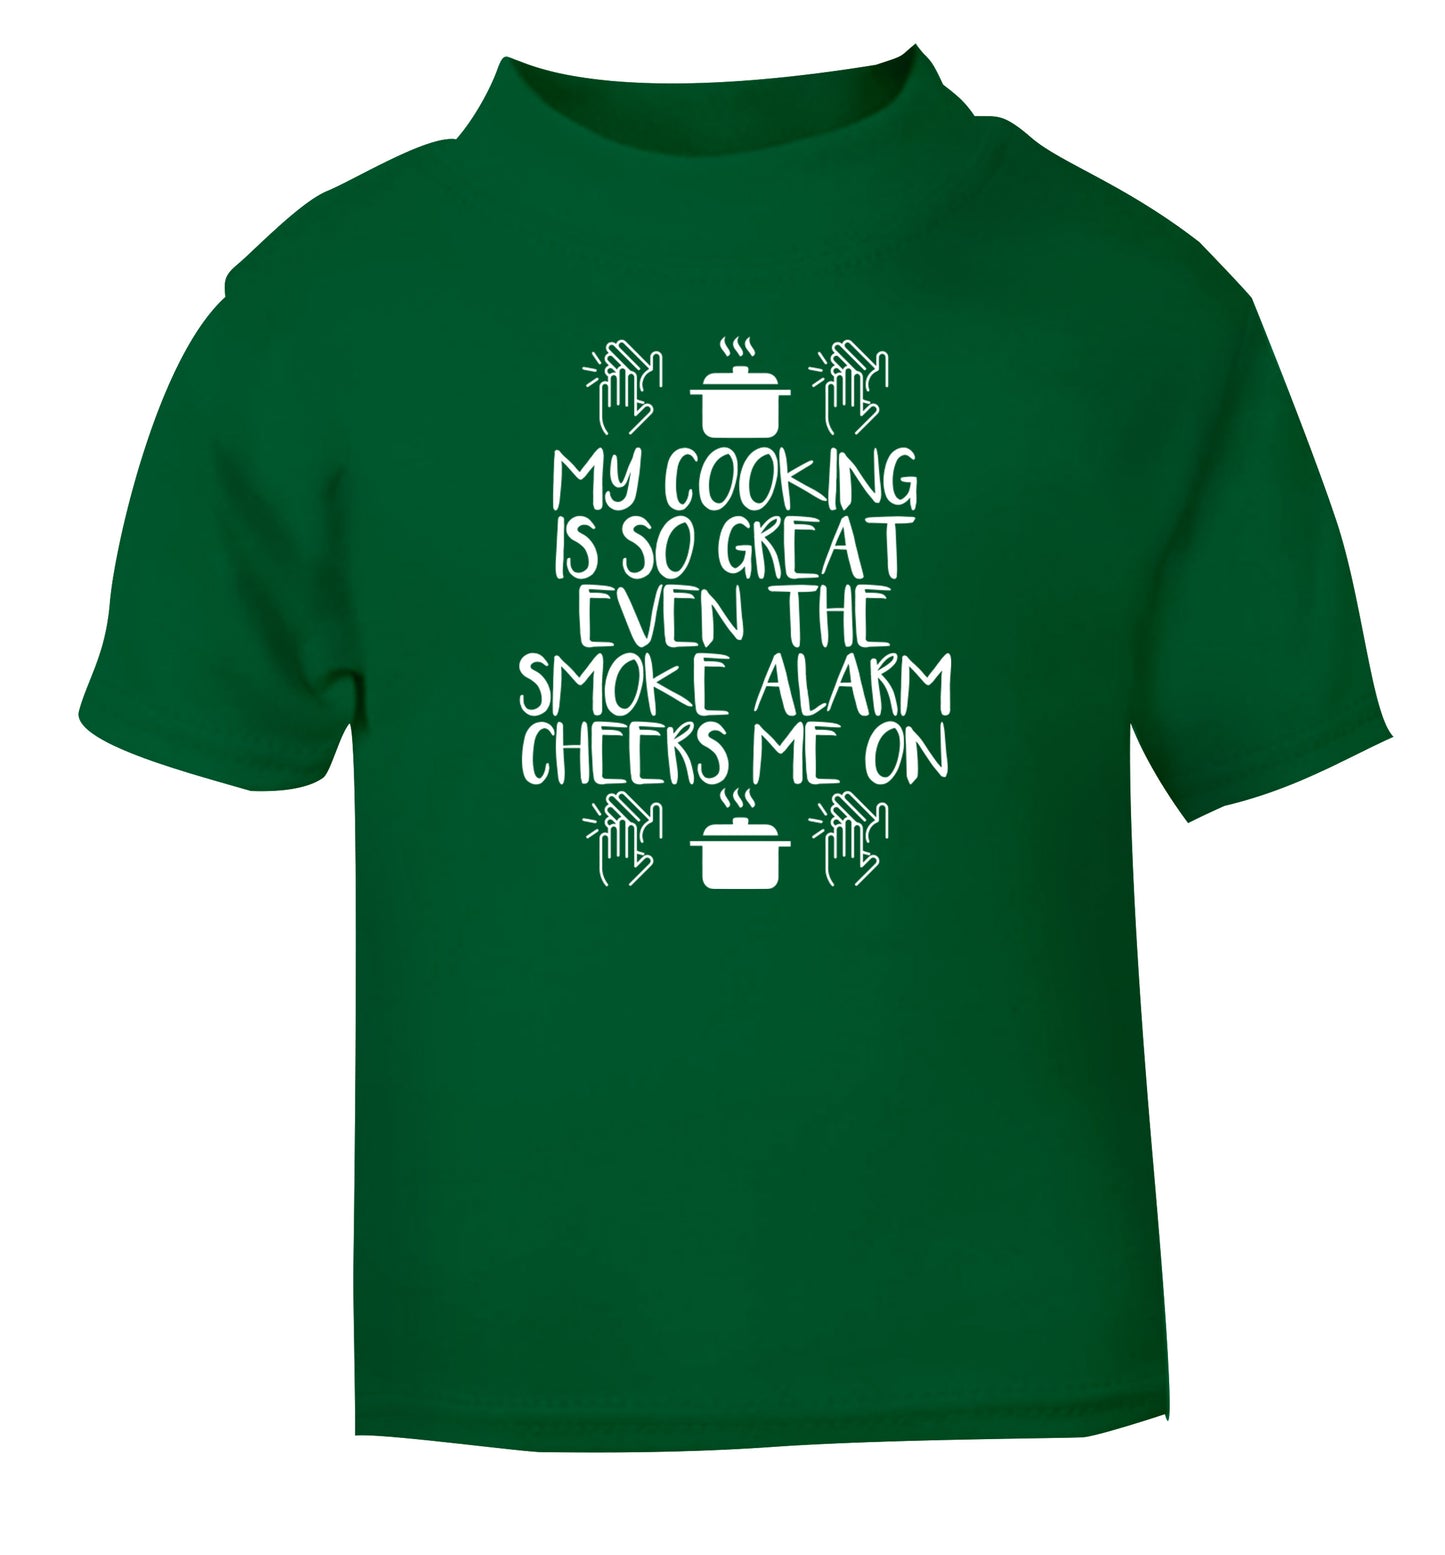 My cooking is so great even the smoke alarm cheers me on! green Baby Toddler Tshirt 2 Years